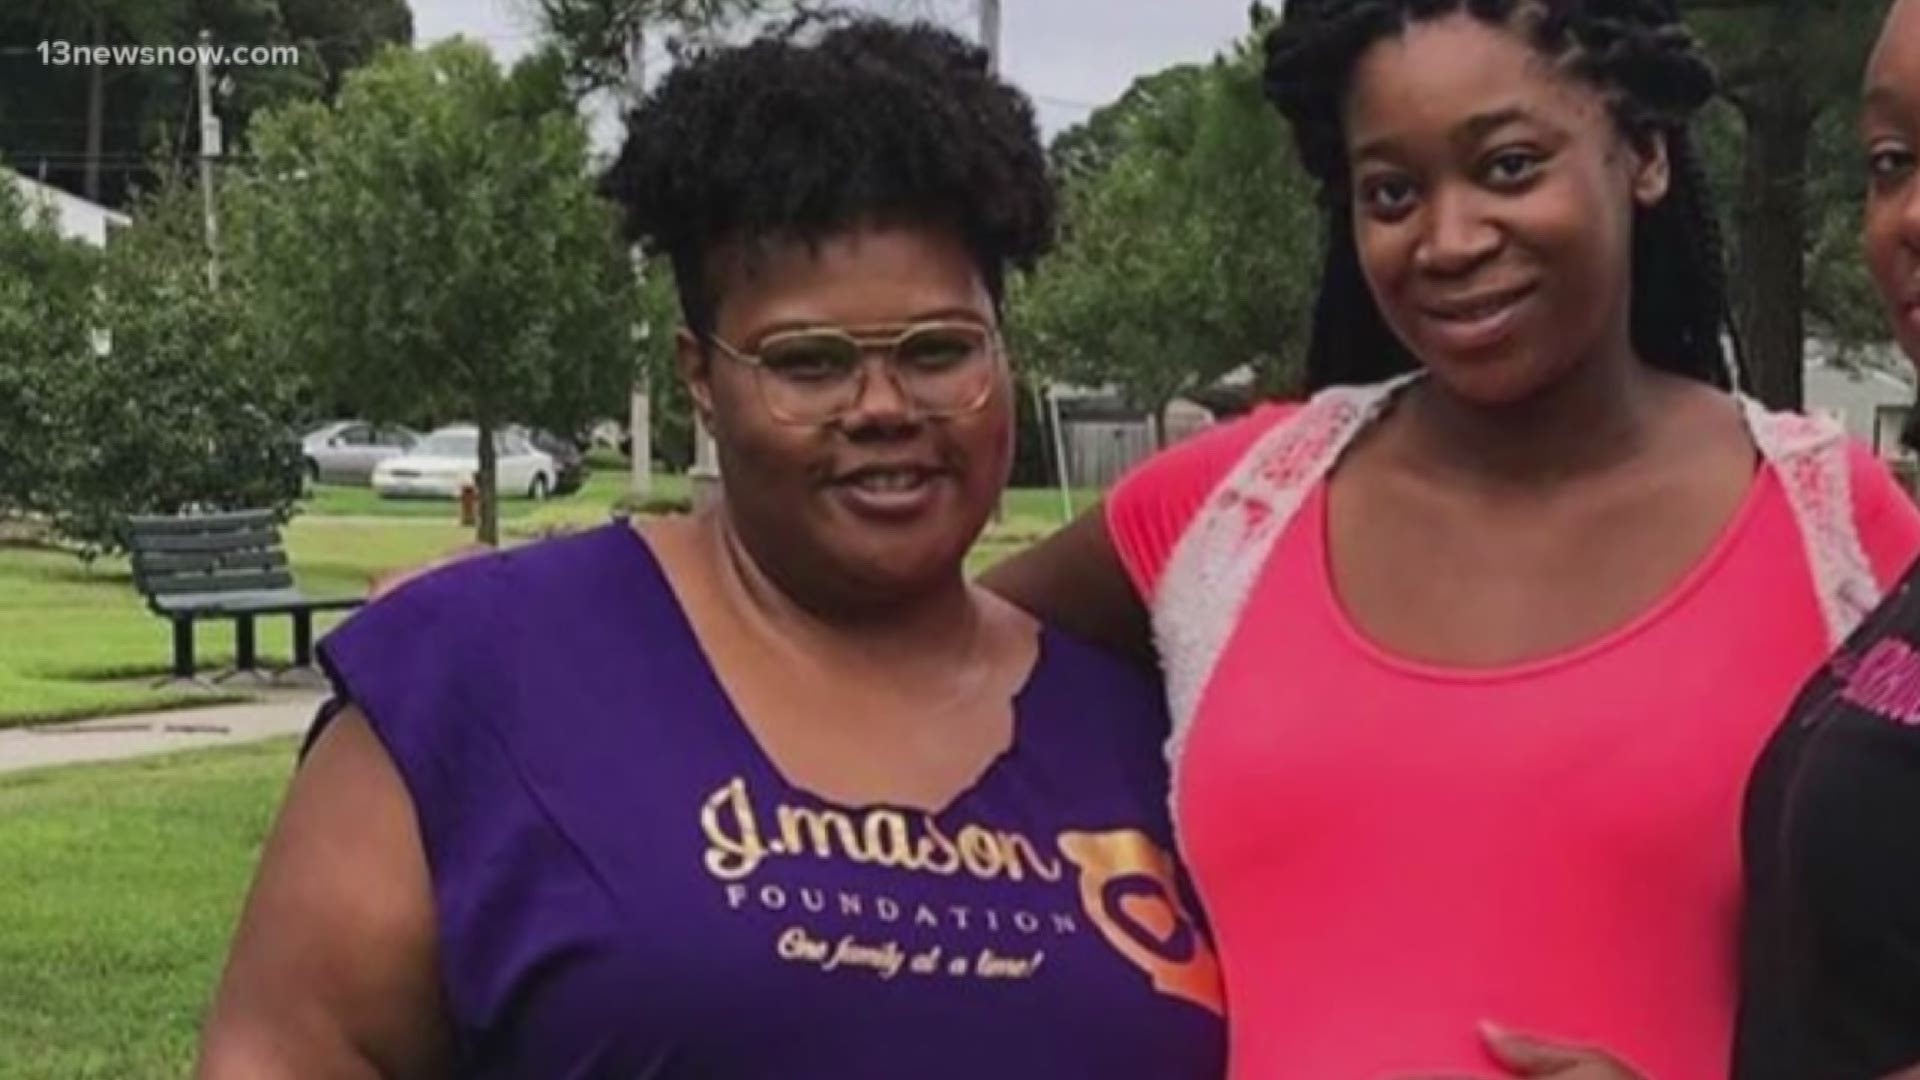 After suffering a miscarriage, Jasmine Moore-Mason decided to help women in need on their journey to and through motherhood.